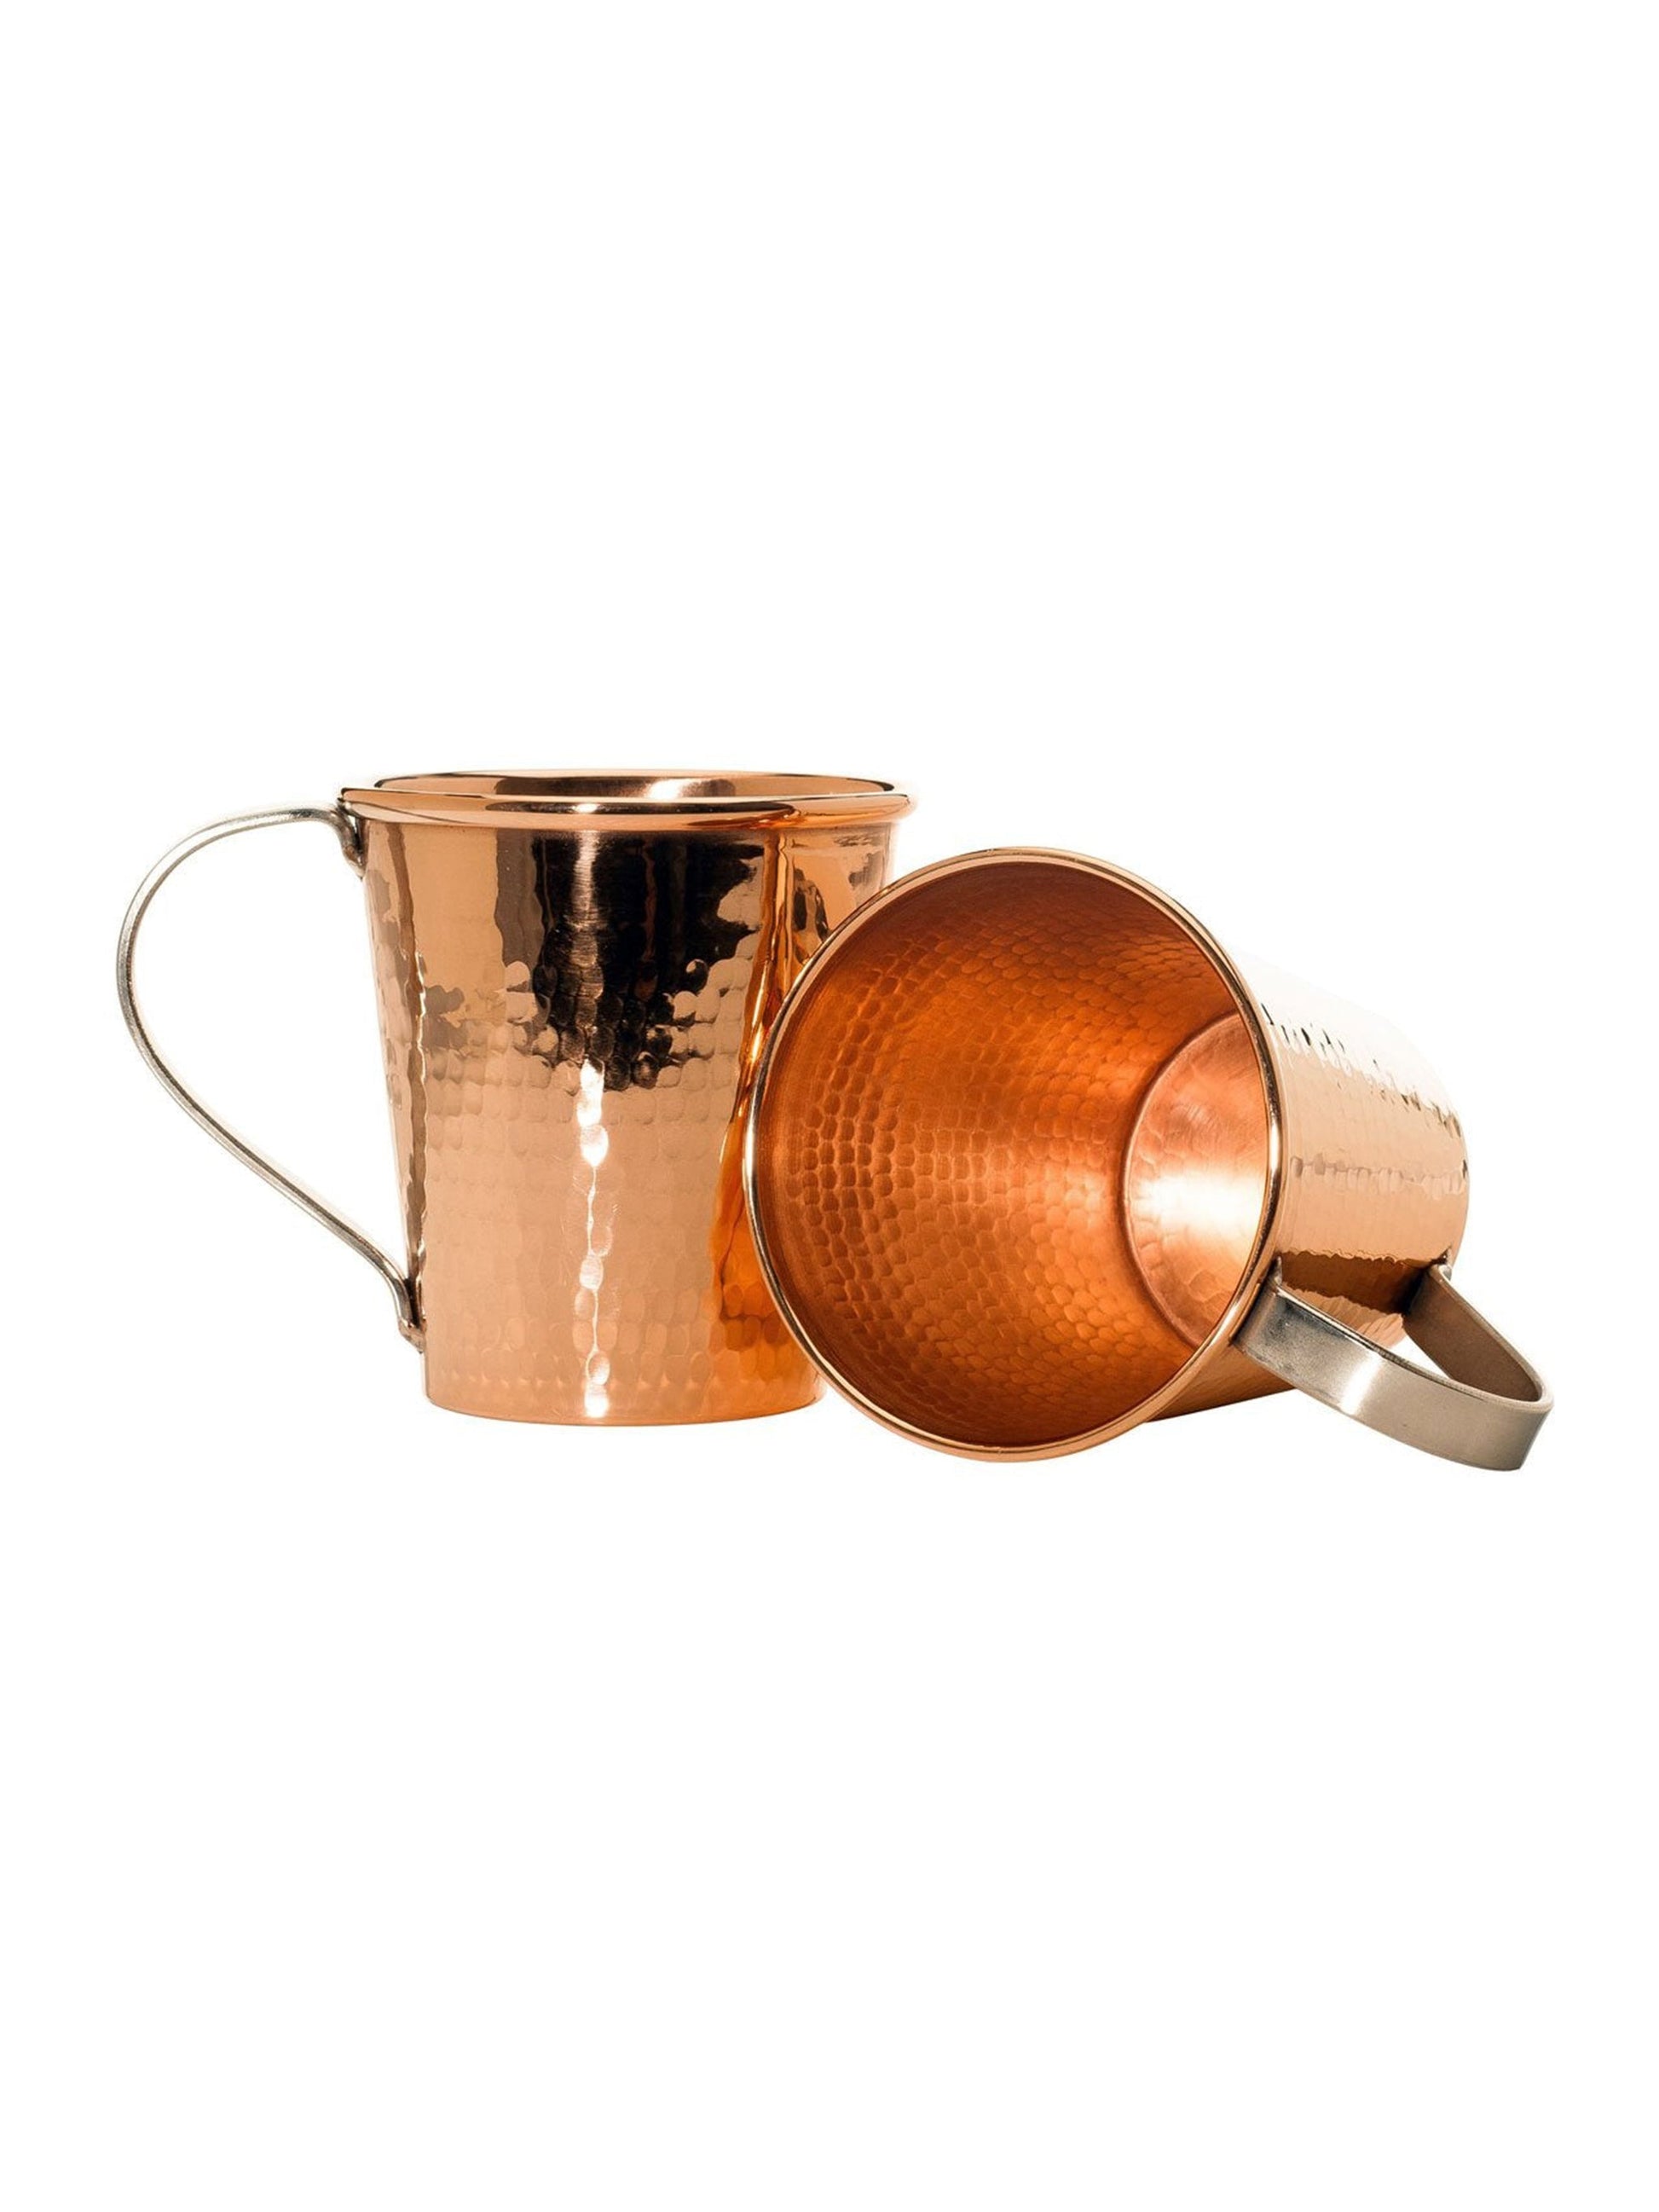 https://westontable.com/cdn/shop/products/Sertado-Copper-Moscow-Mule-Mug-Stainless-Steel-Handle-Weston-Table-SP_269a5676-a9c4-450a-88aa-2aaafb8b9413.jpg?v=1642090344&width=1946